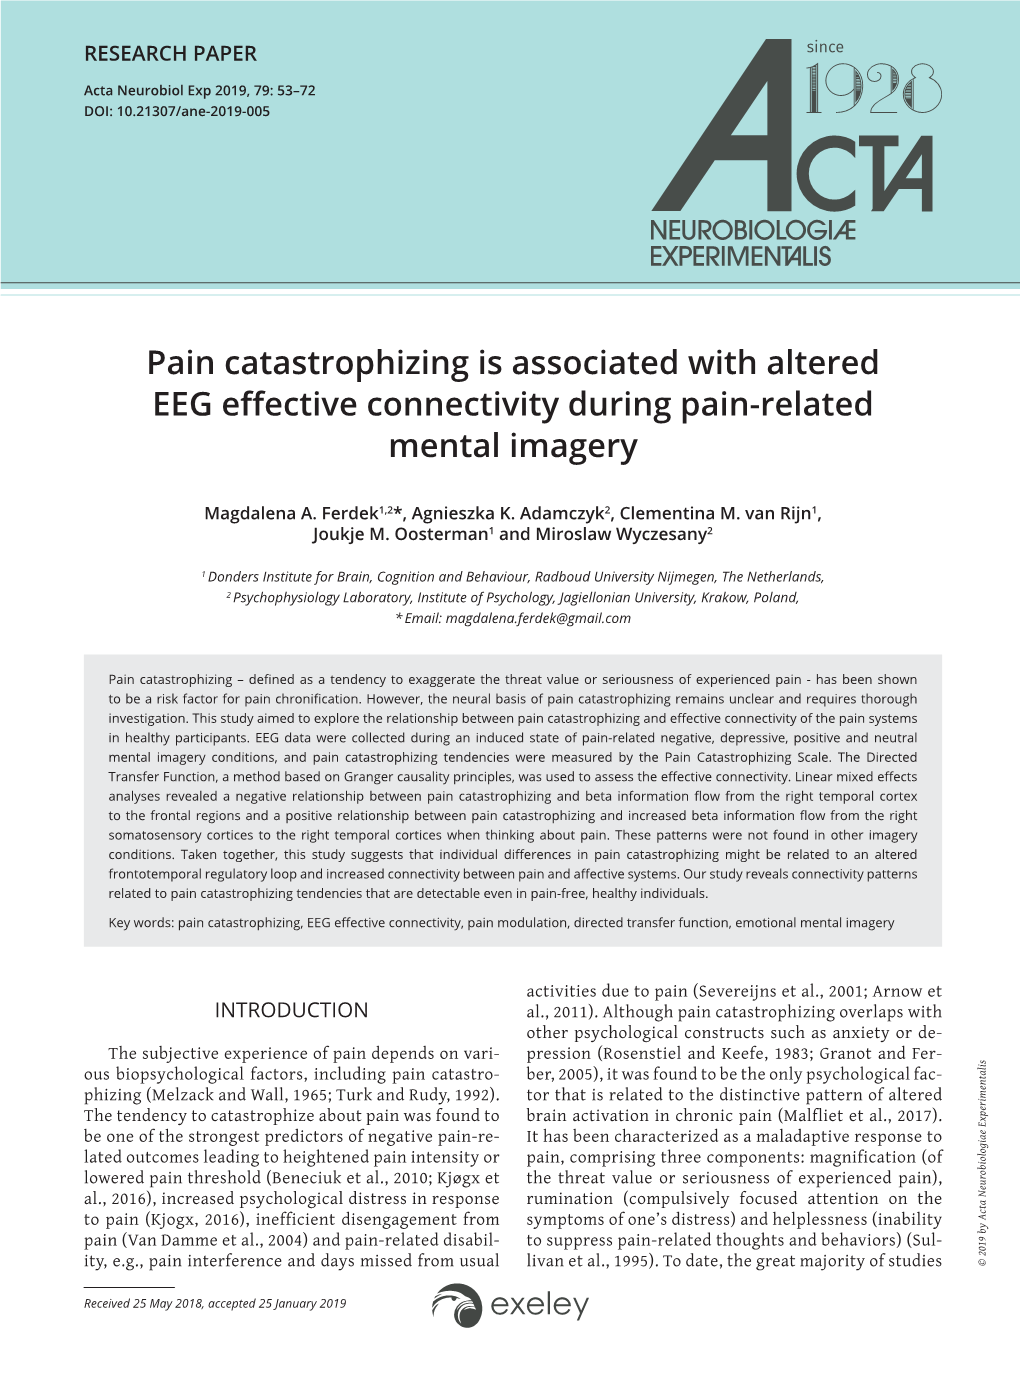 Pain Catastrophizing Is Associated with Altered EEG Effective Connectivity During Pain‑Related Mental Imagery